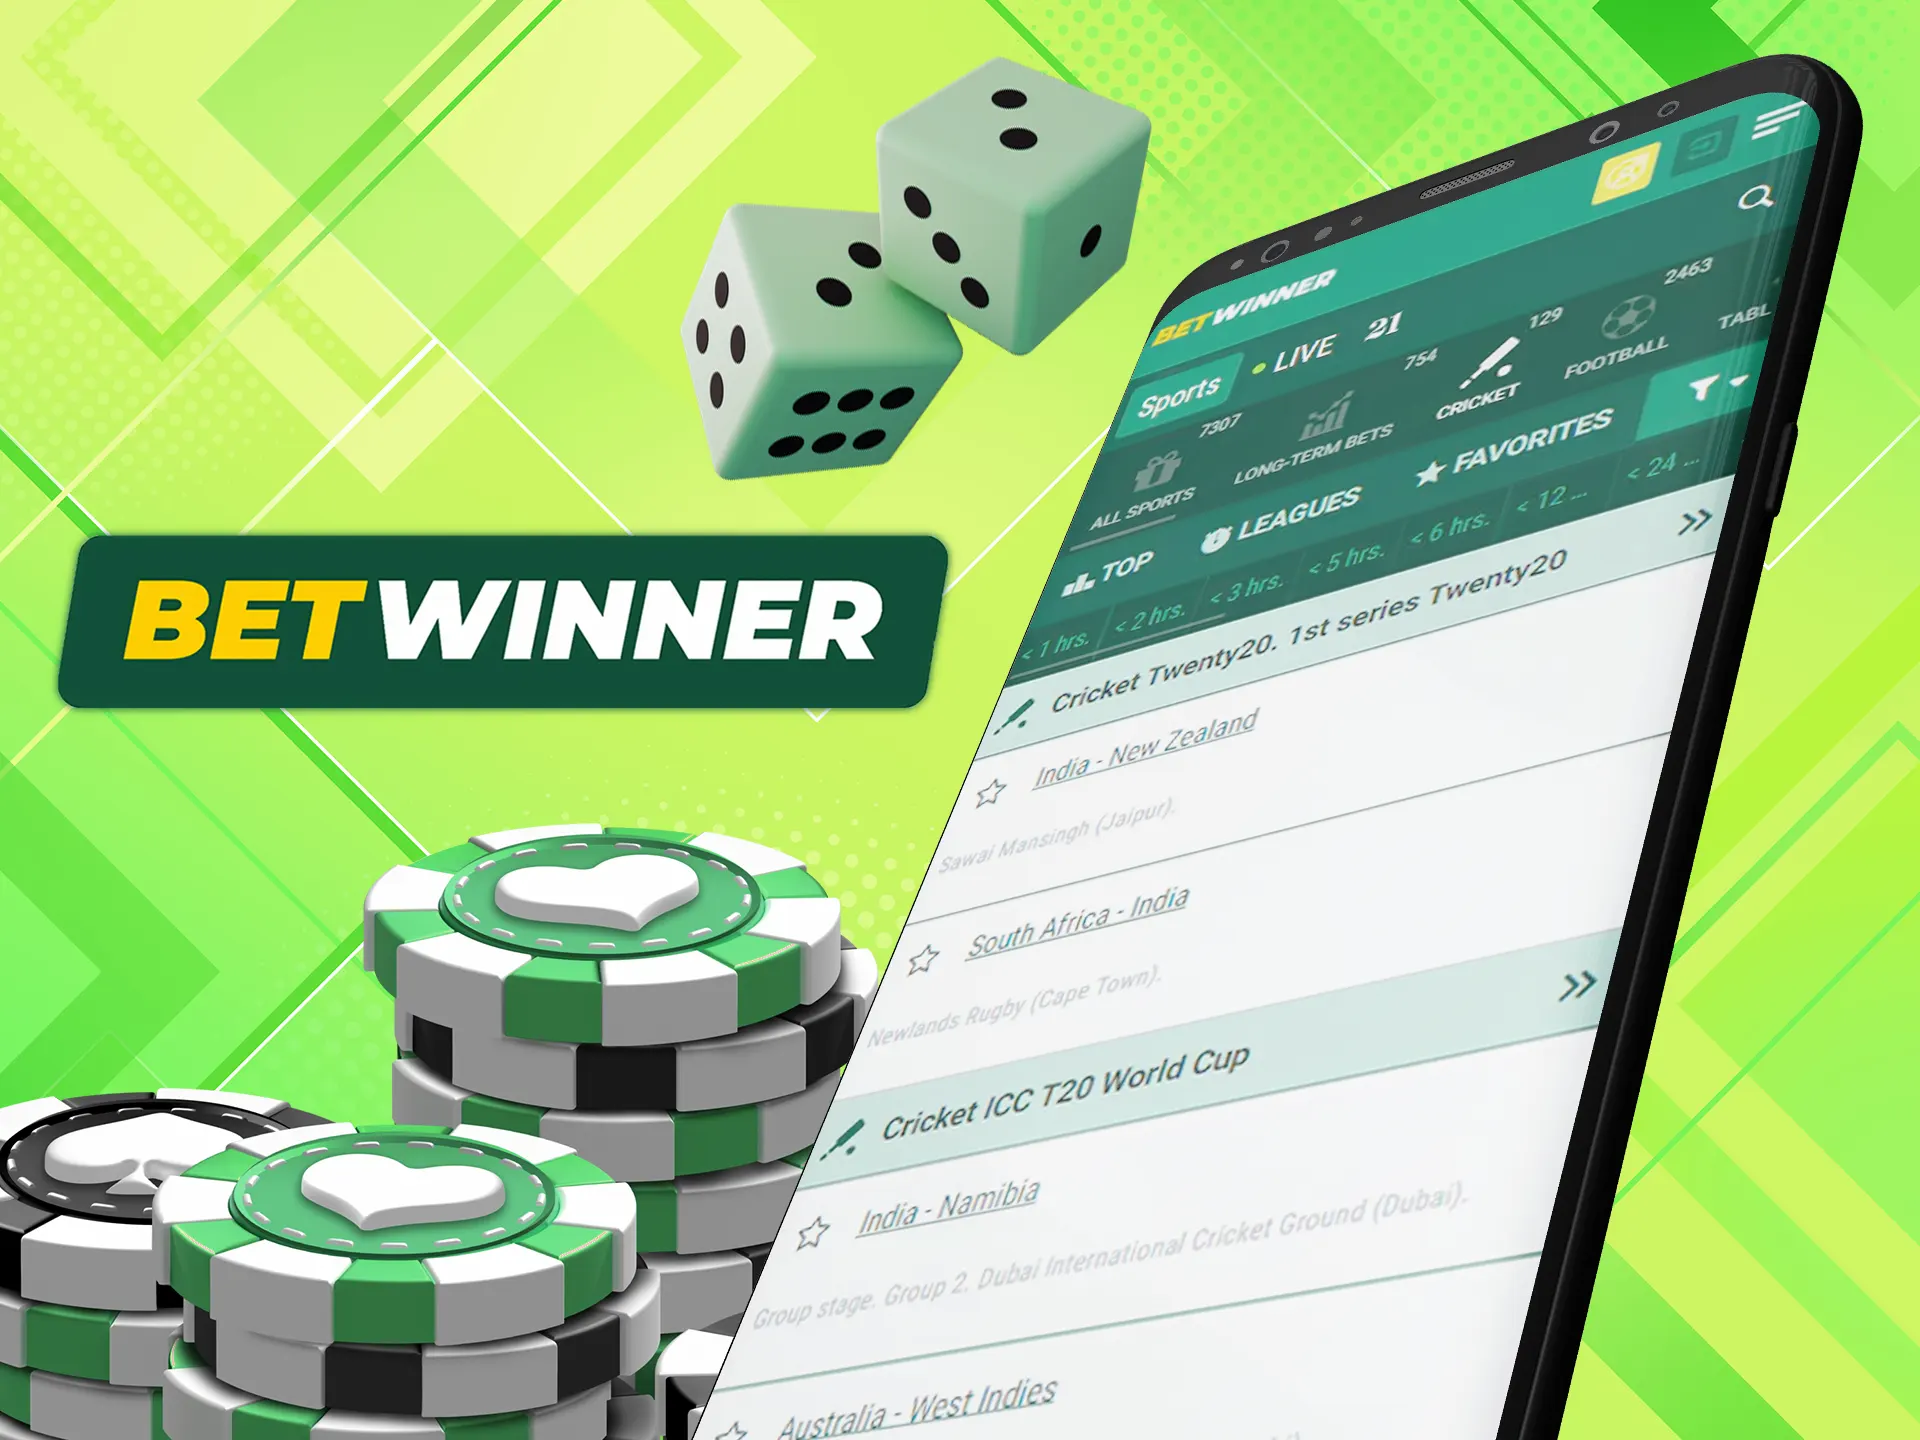 Play casino games in the Betwinner app.